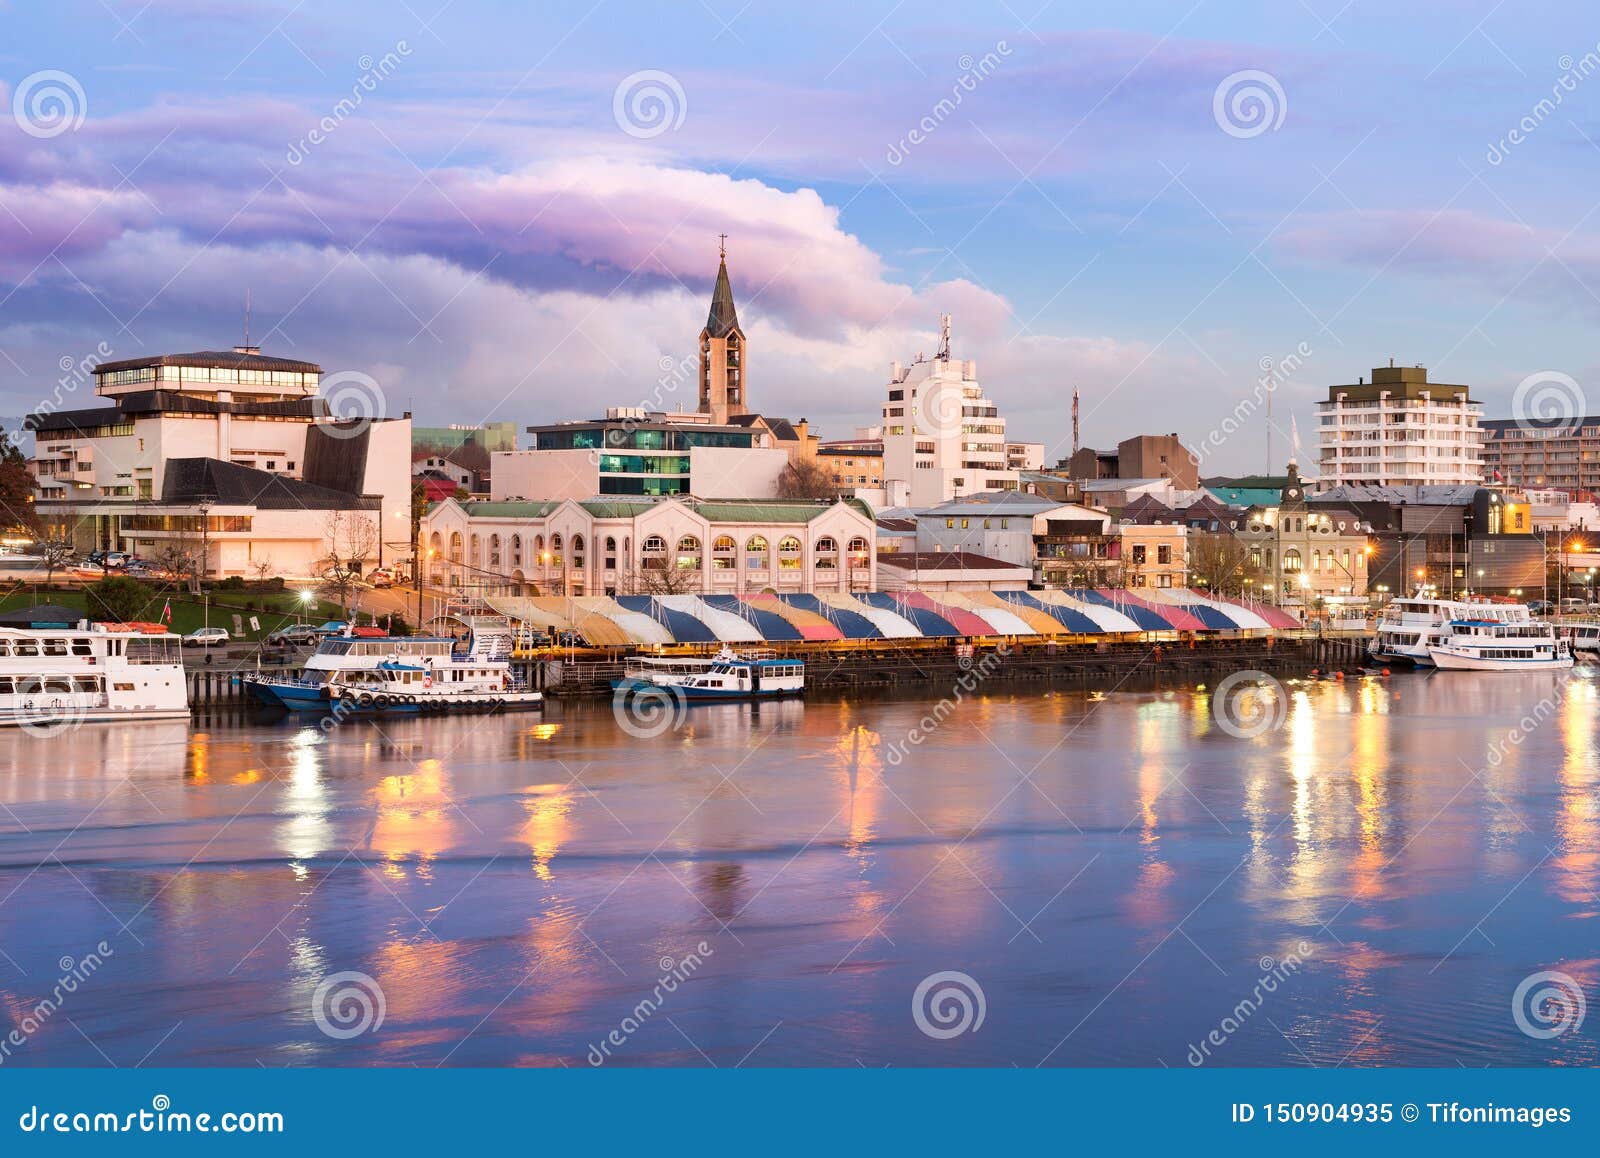 the city of valdivia at the shore of calle-calle river, chile